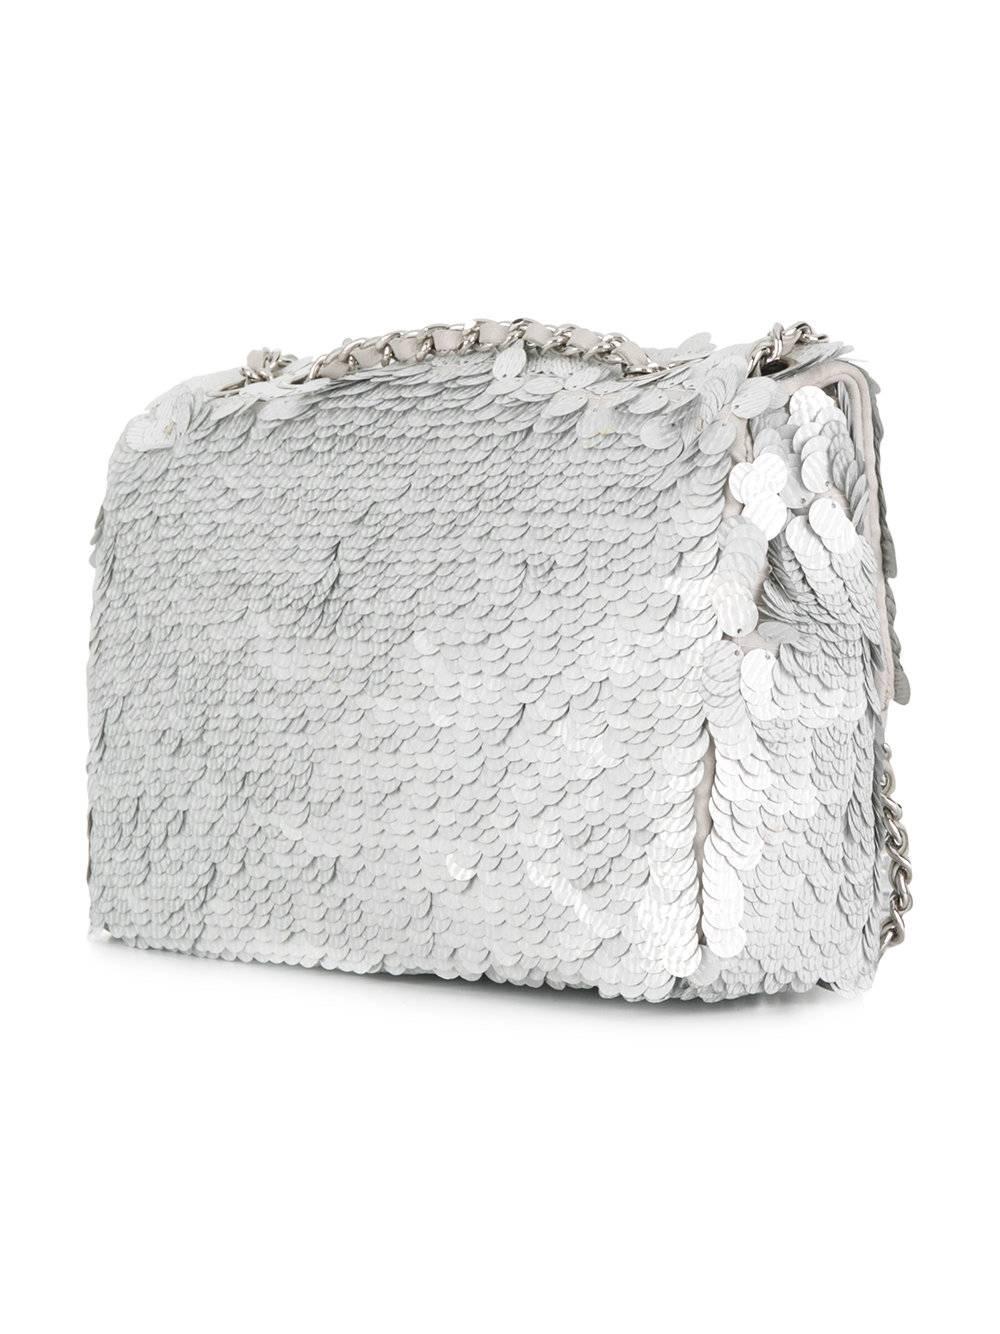 This silver sequin logo shoulder flap bag from Chanel featuring an open top design, a chain shoulder strap, an internal zipped pocket and an internal logo patch.

This bag comes with its original Chanel box, dust bag, certificate of authenticity and